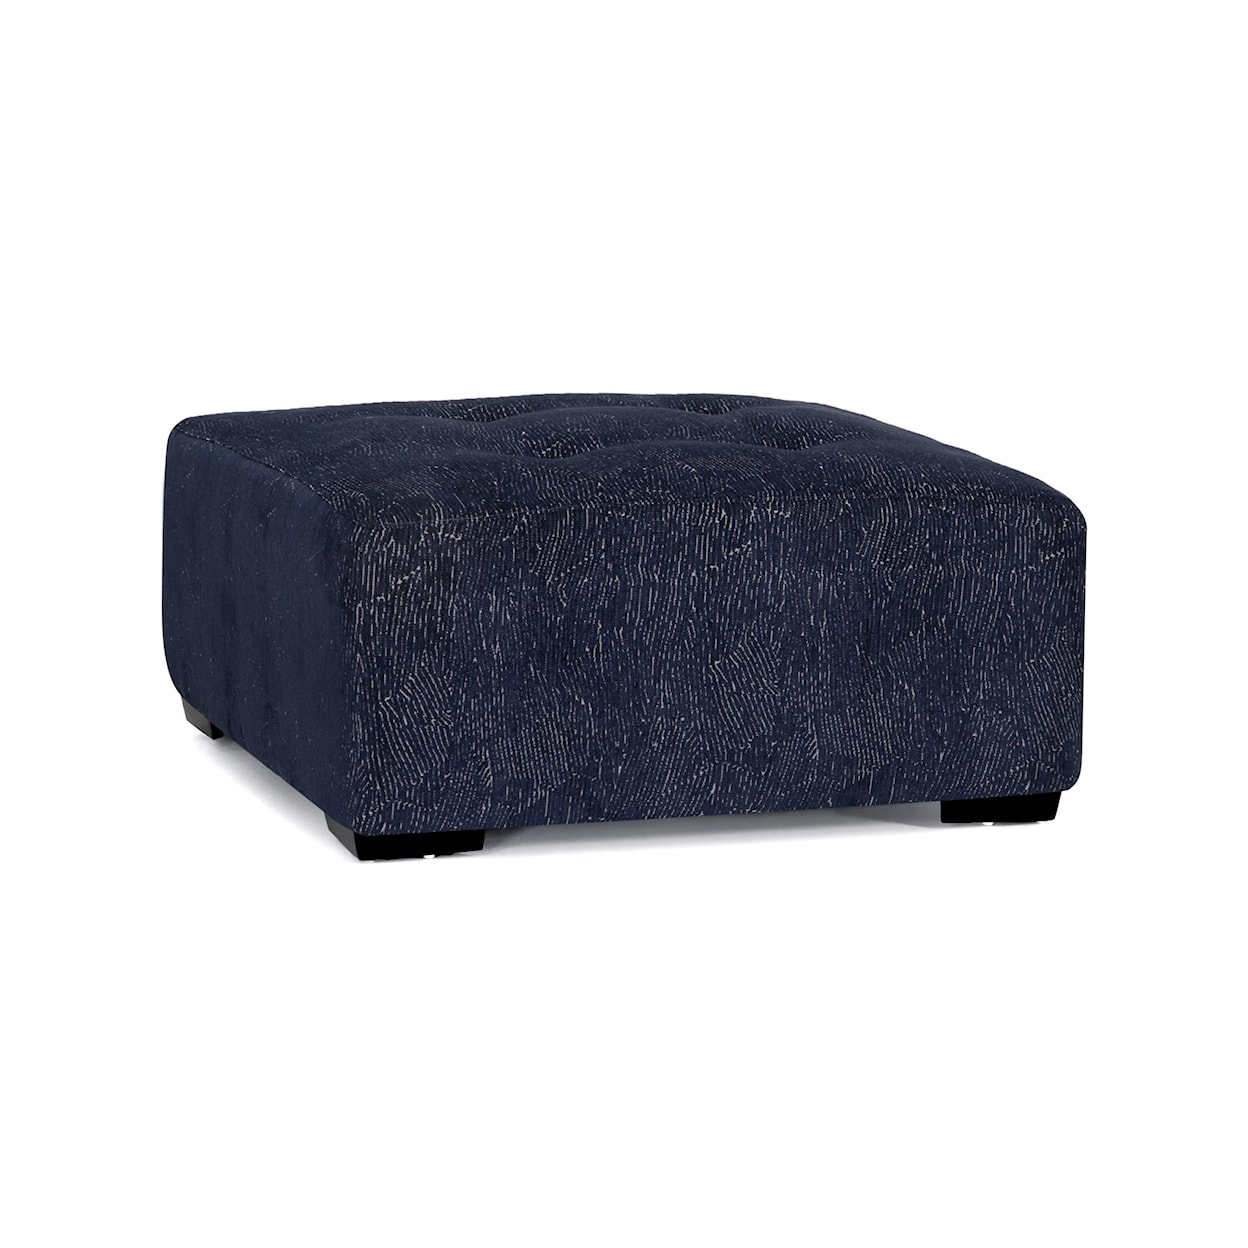 Franklin 903 Hollyn Square Accent Ottoman